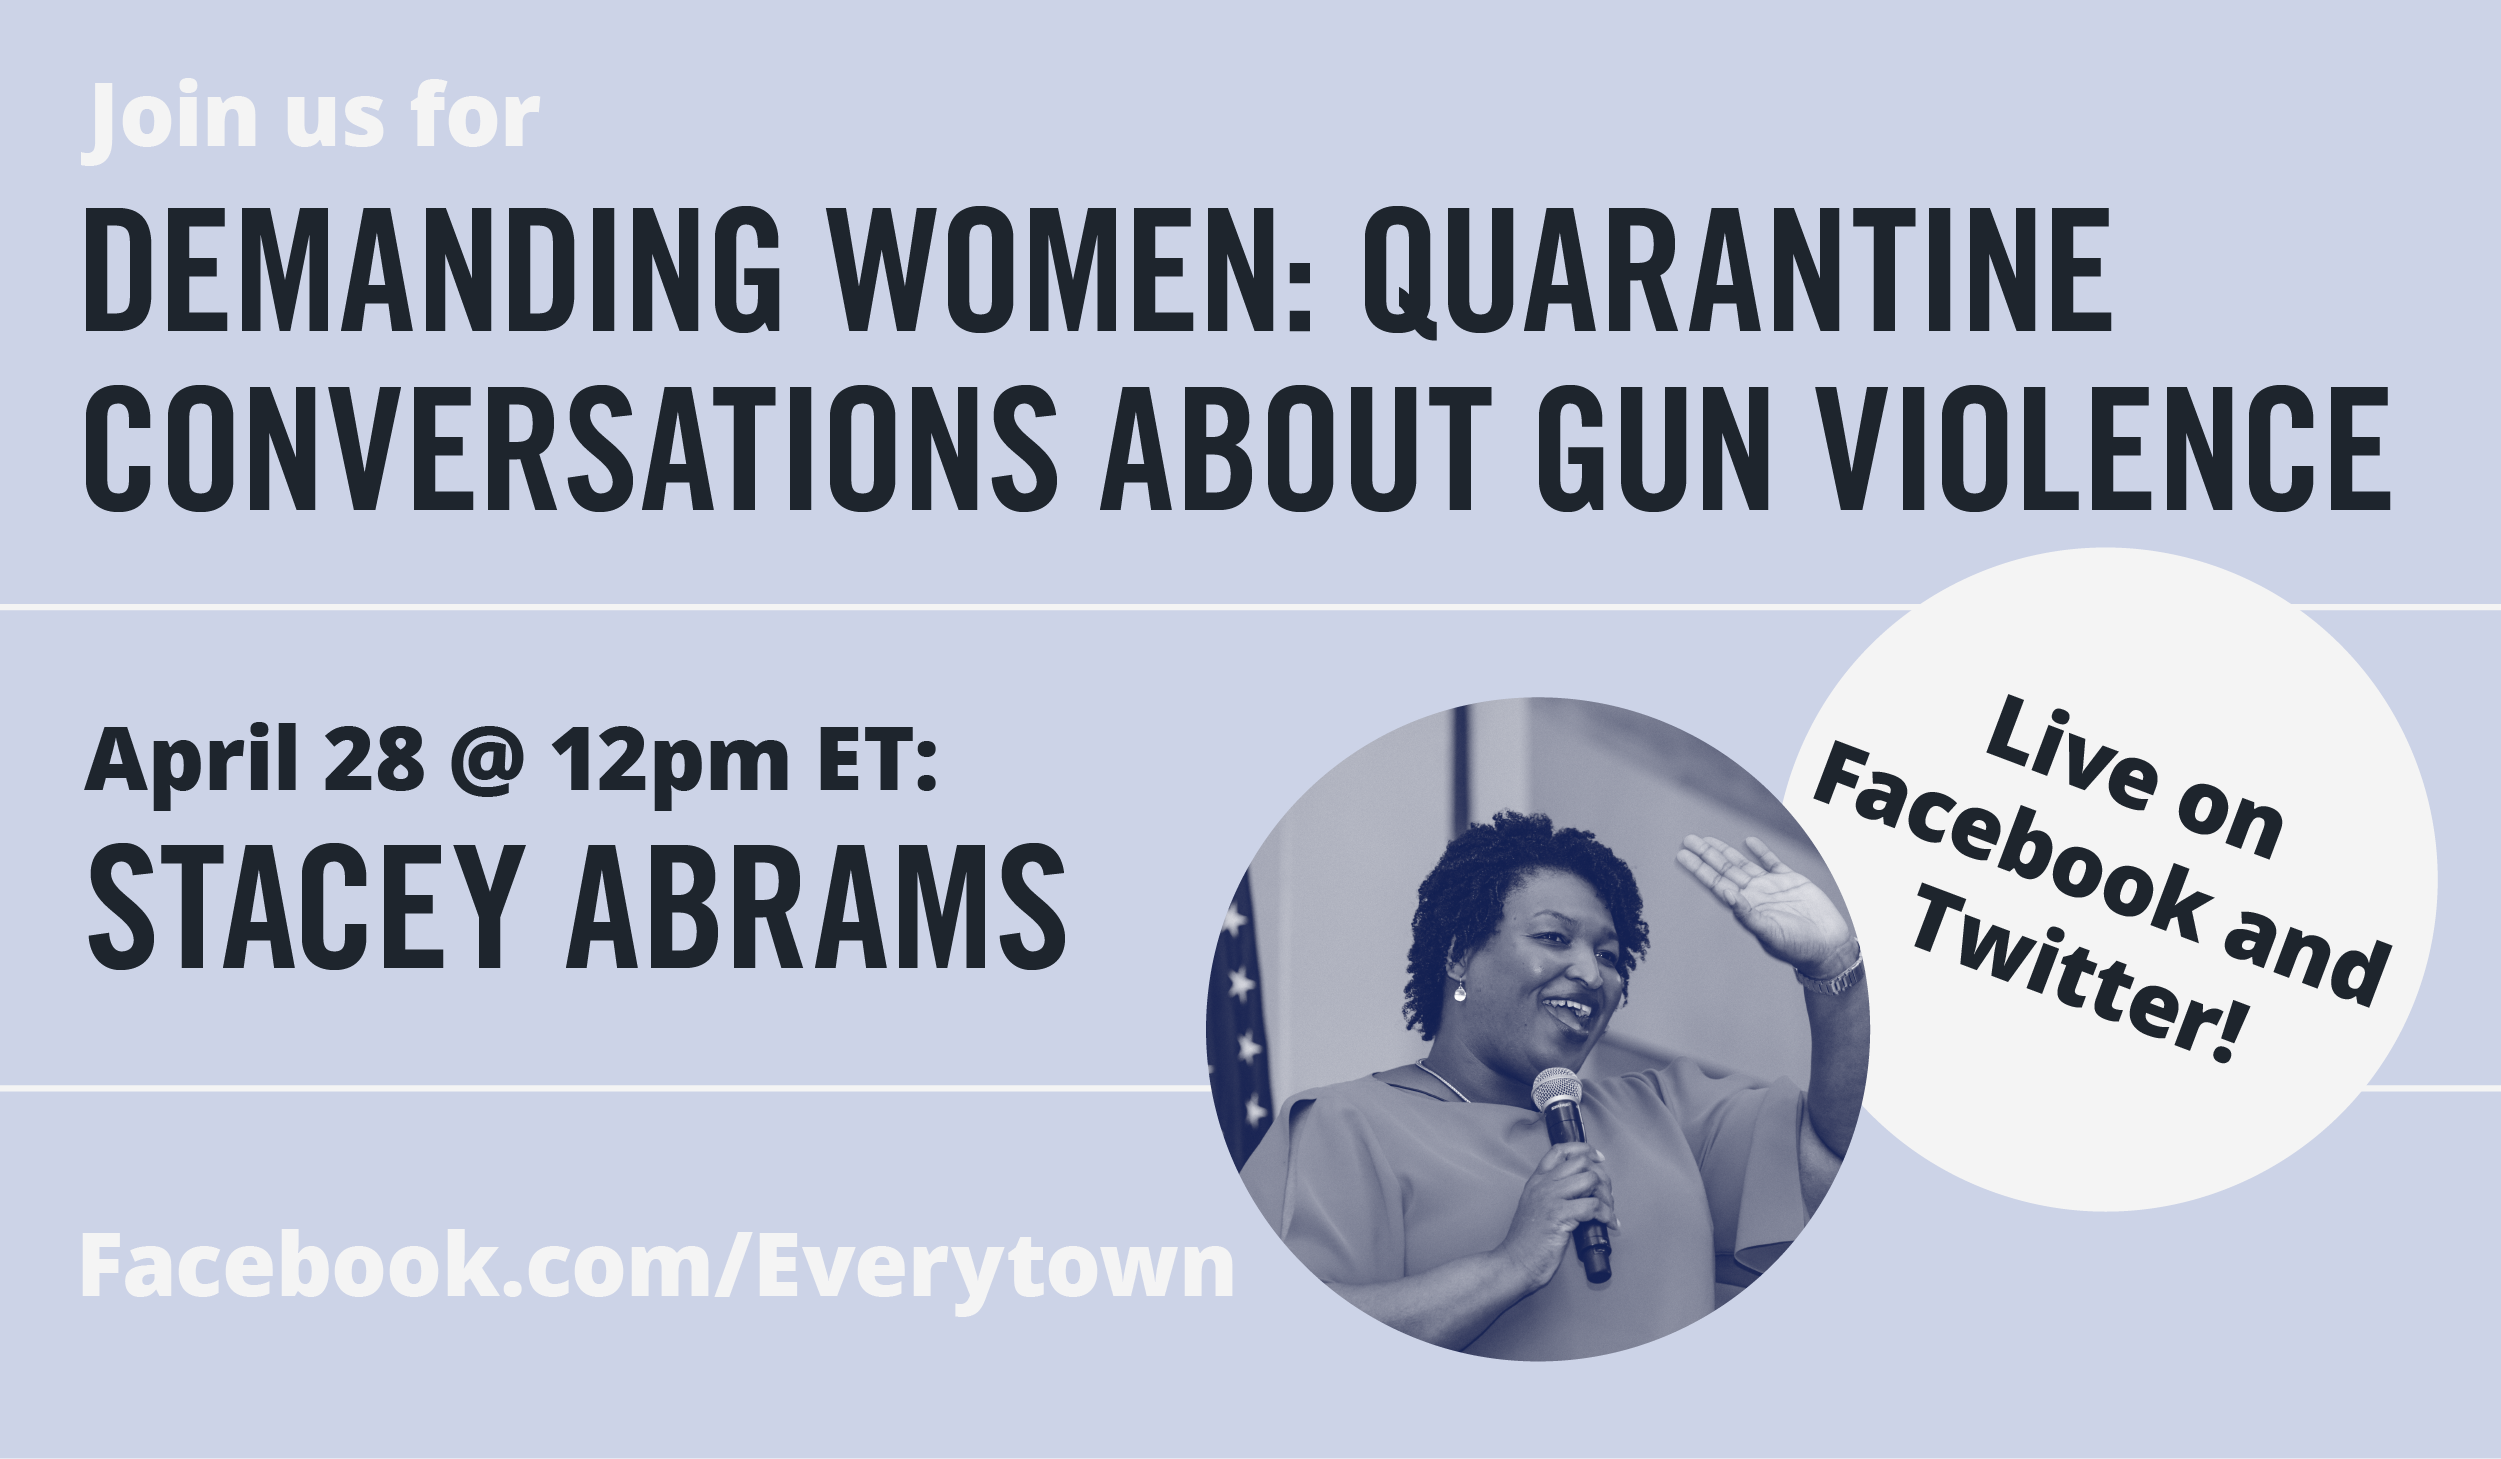 RSVP for today's conversation with Stacey Abrams